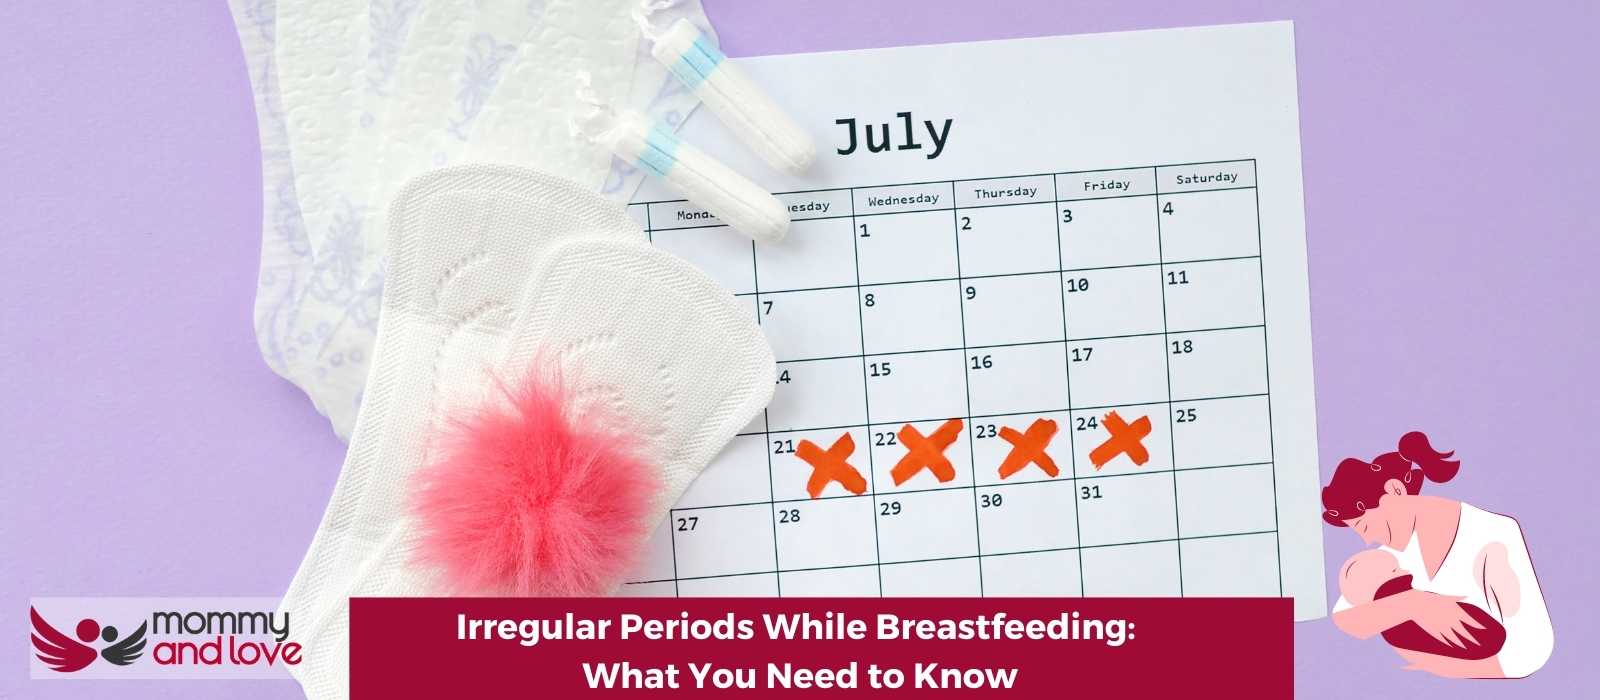 Irregular Periods While Breastfeeding: What You Need to Know